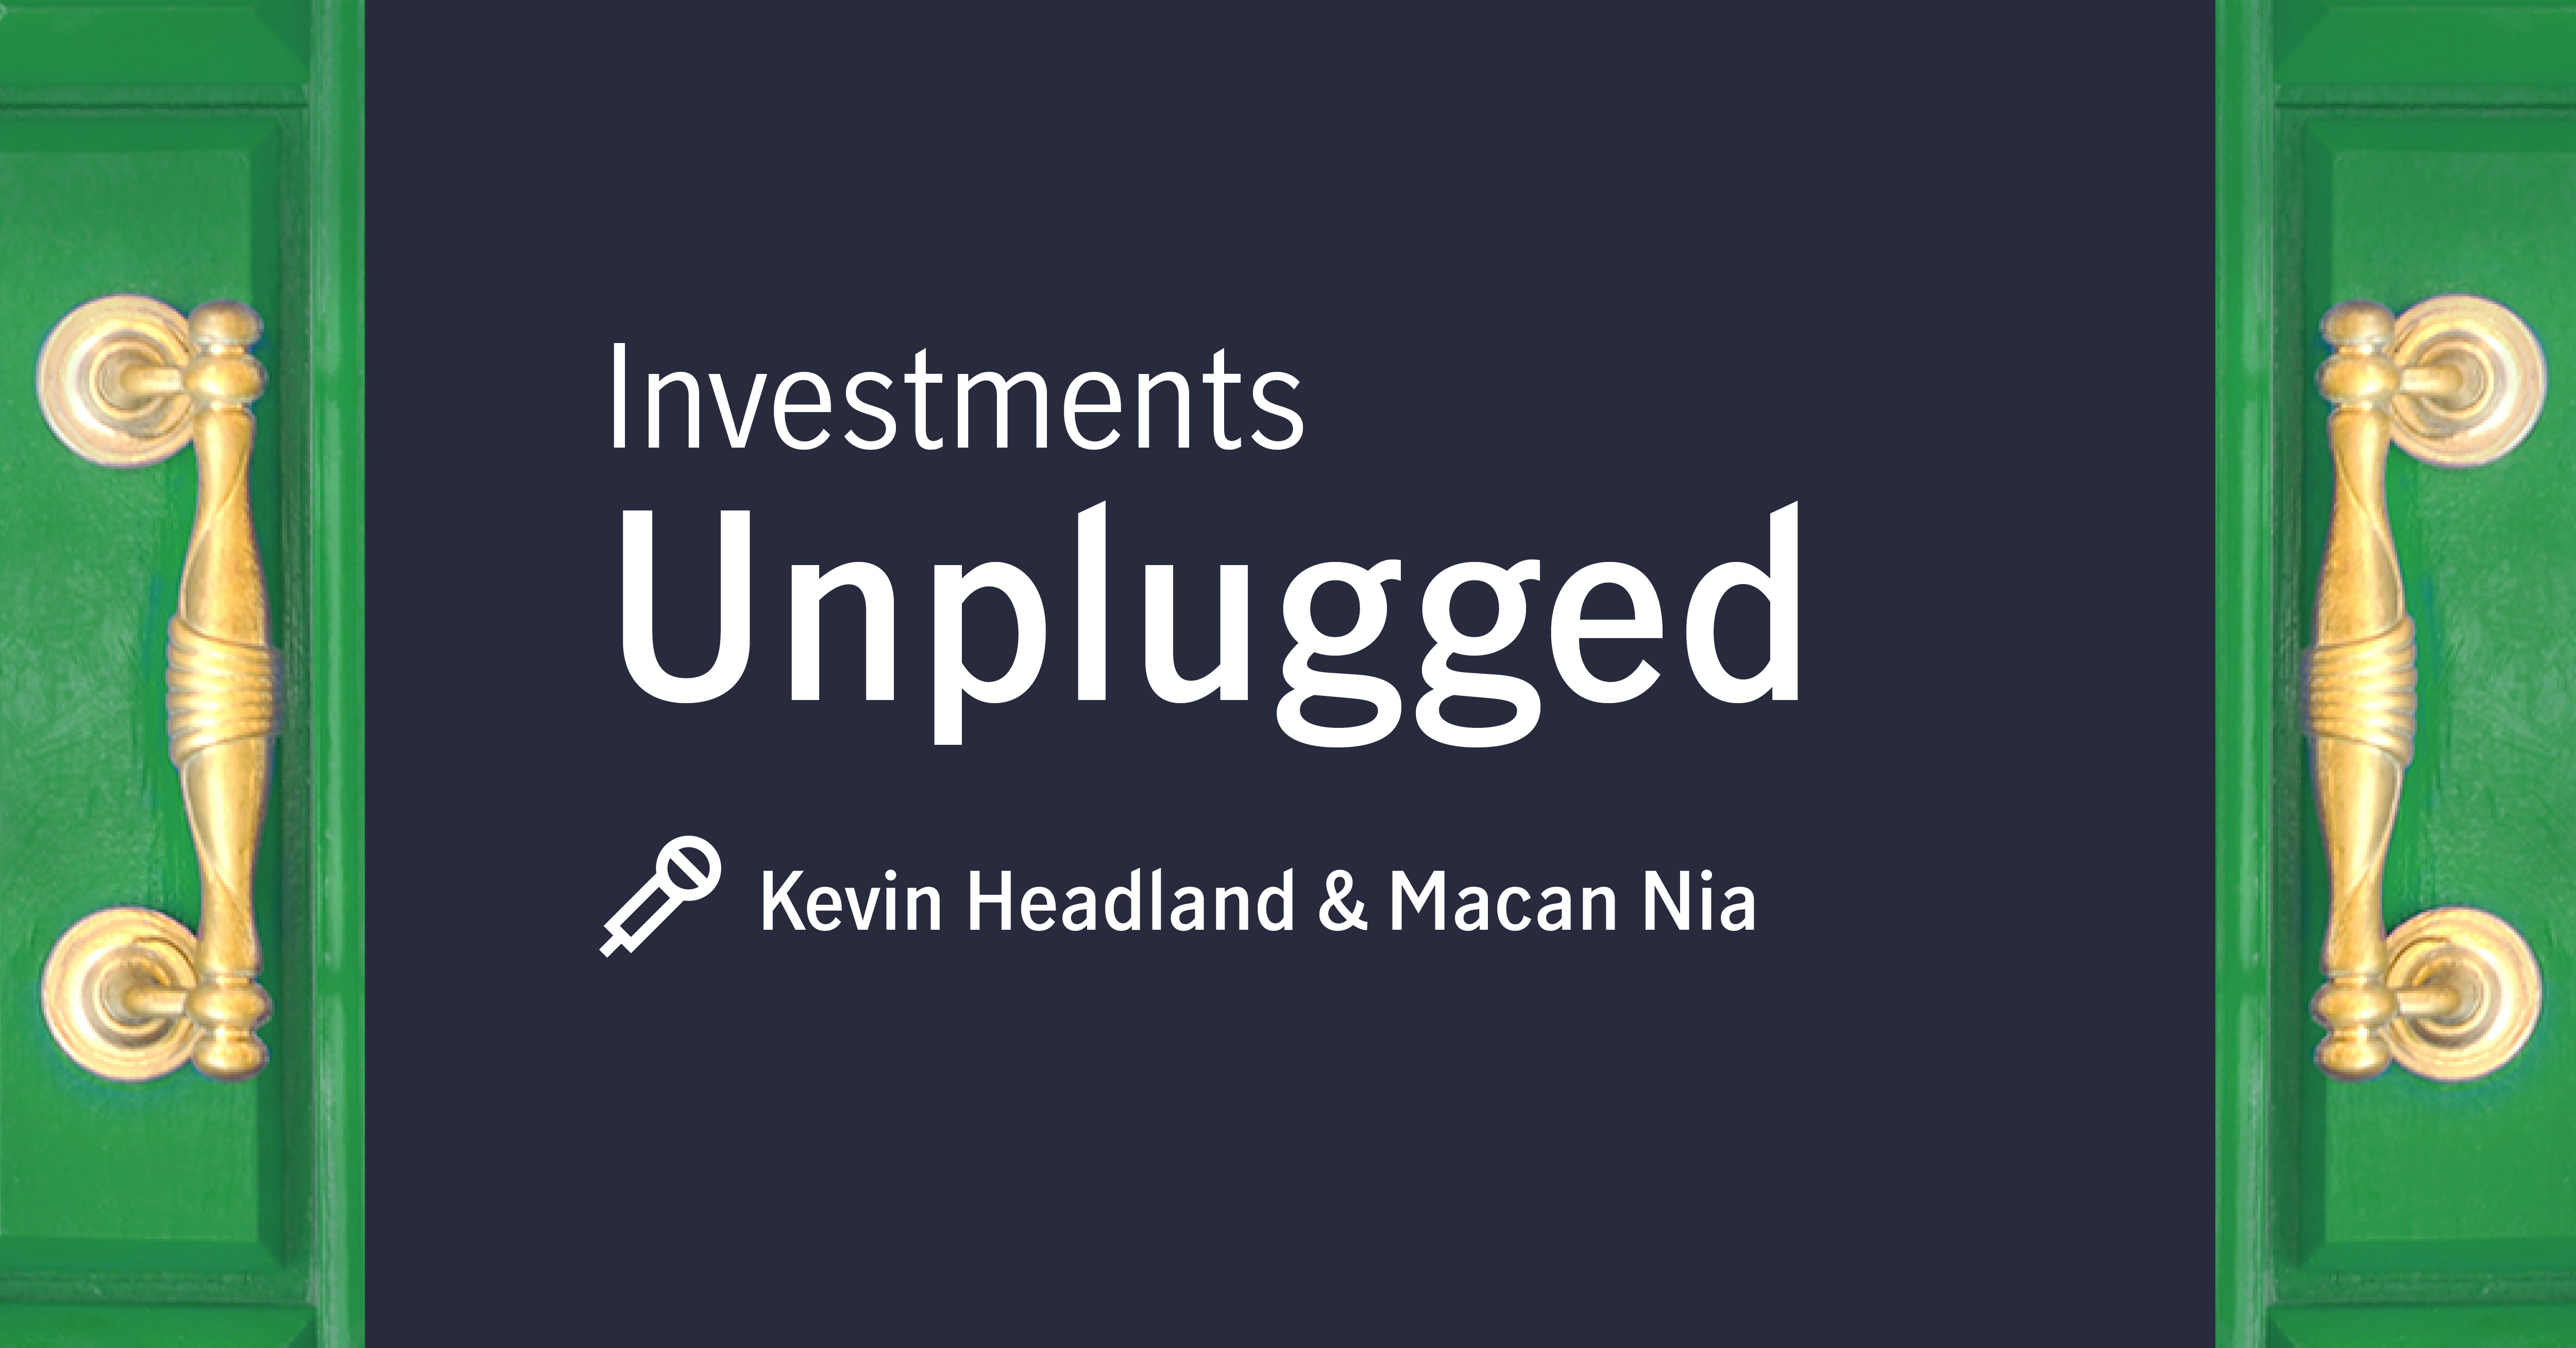 Investments Unplugged